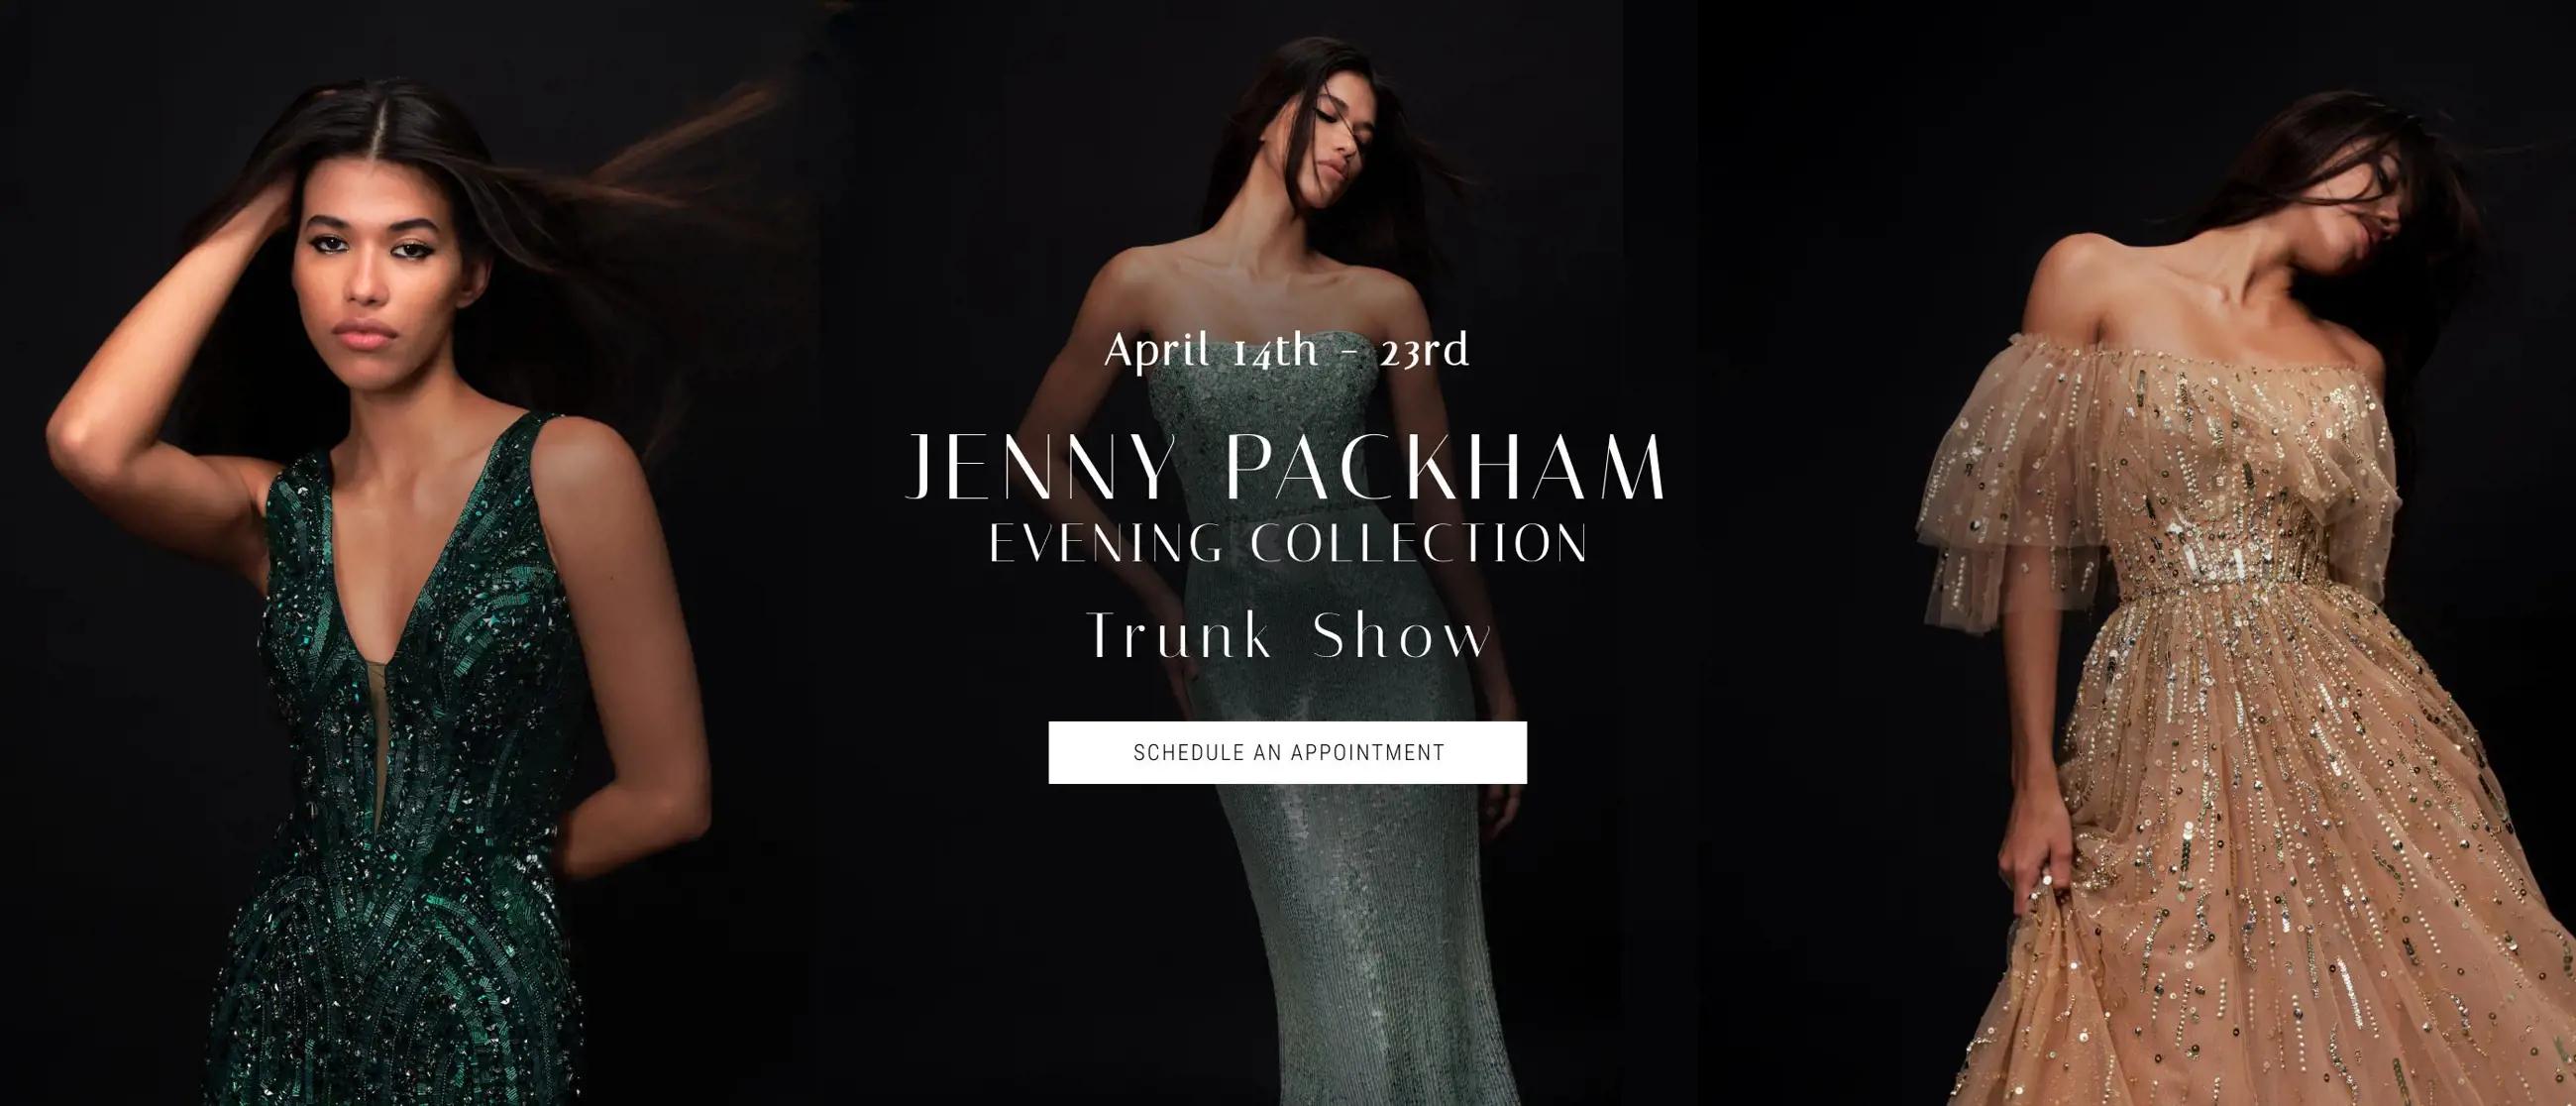 Jenny Packham Evening Collection Trunk Show Banner